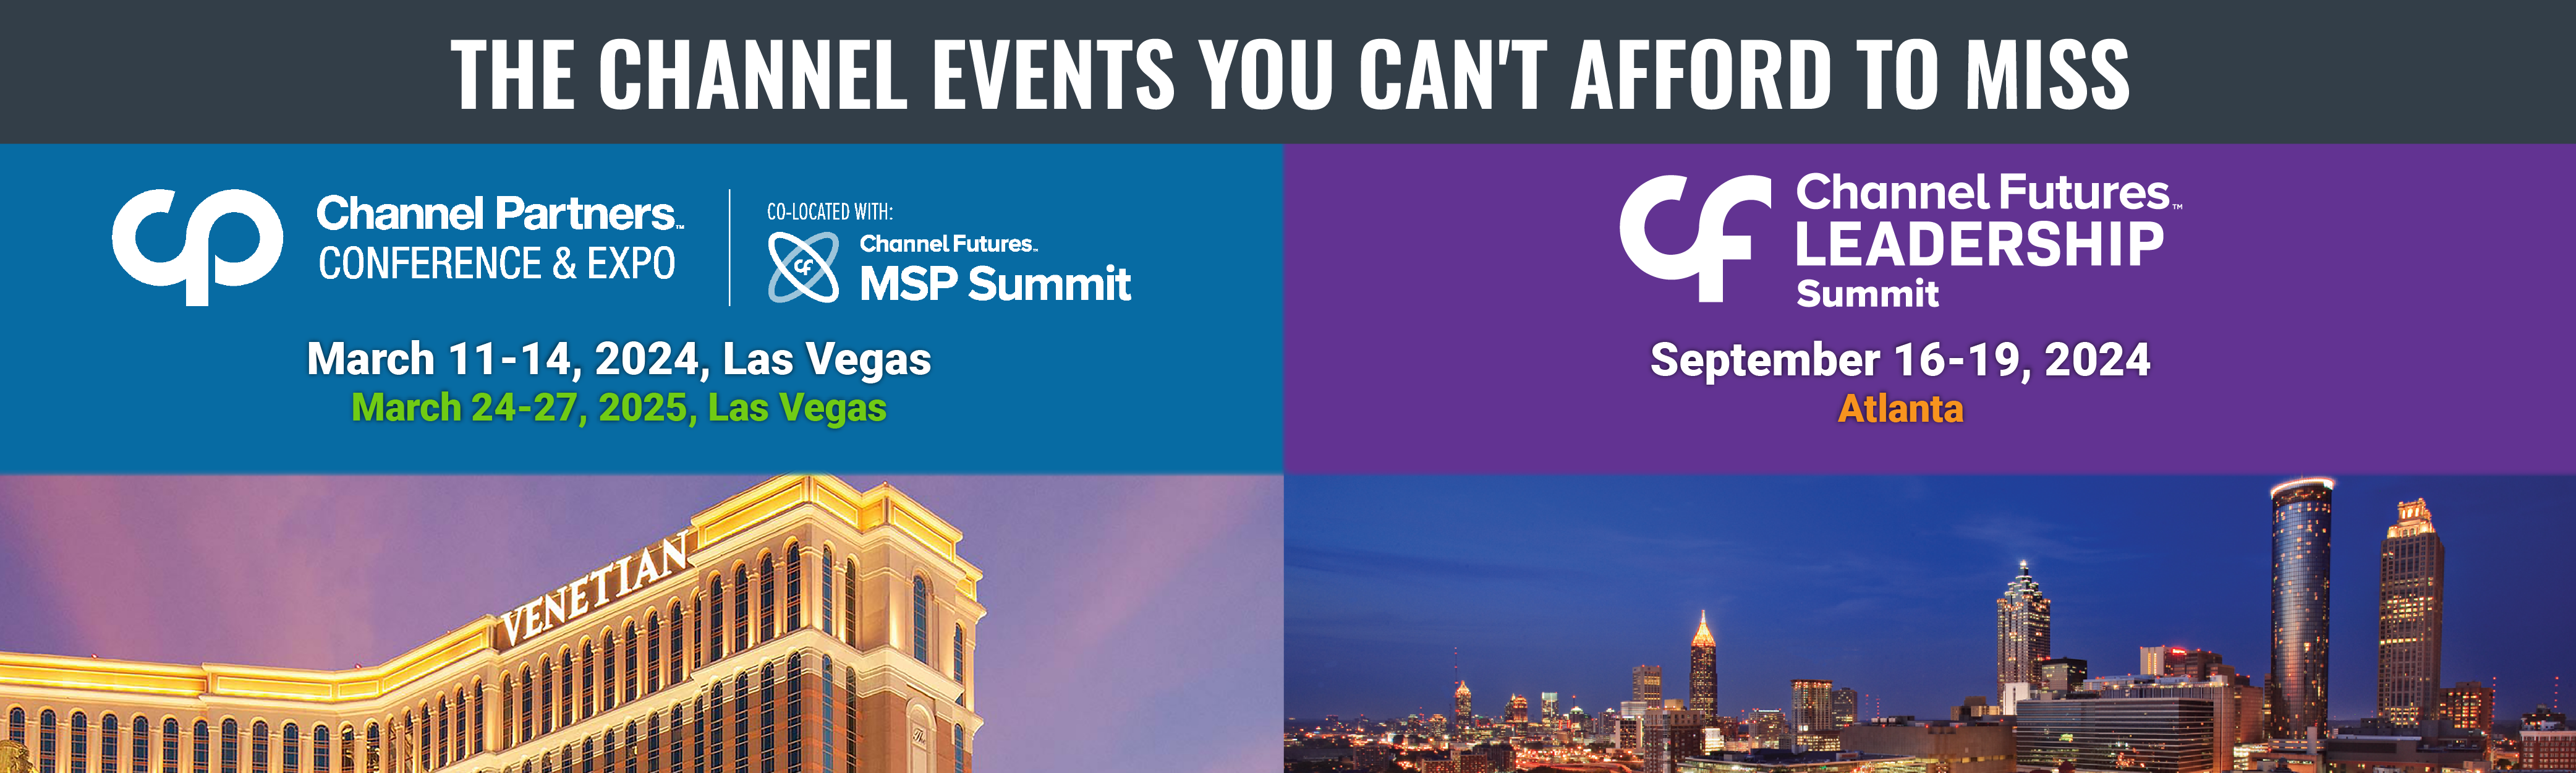 The Channel Events You Can't Afford to Miss. Channel Futures Leadership Summit, September 16-19, 2024 in Atlanta. Channel Partners Conference & Expo, co-located with Channel Futures MSP Summit, March 11-14, 2024 and March 24-27, 2025 in Las Vegas.